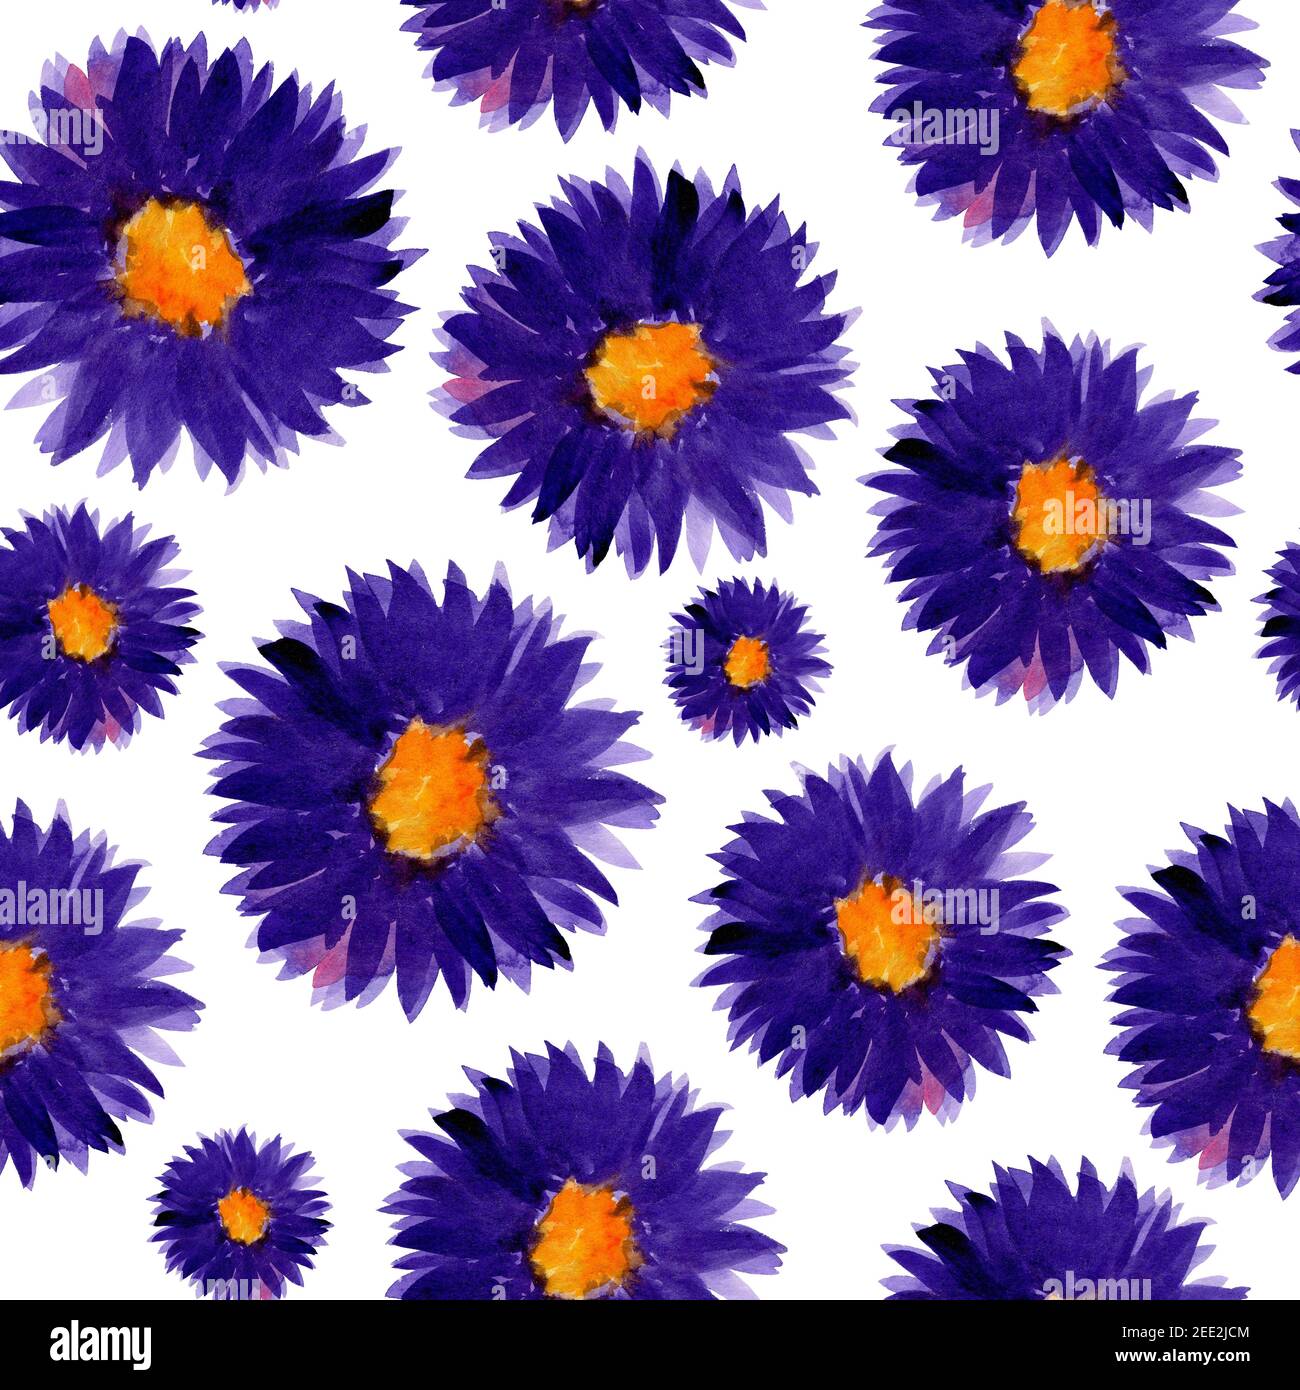 Blue sunny aster flowers seamless pattern Stock Photo